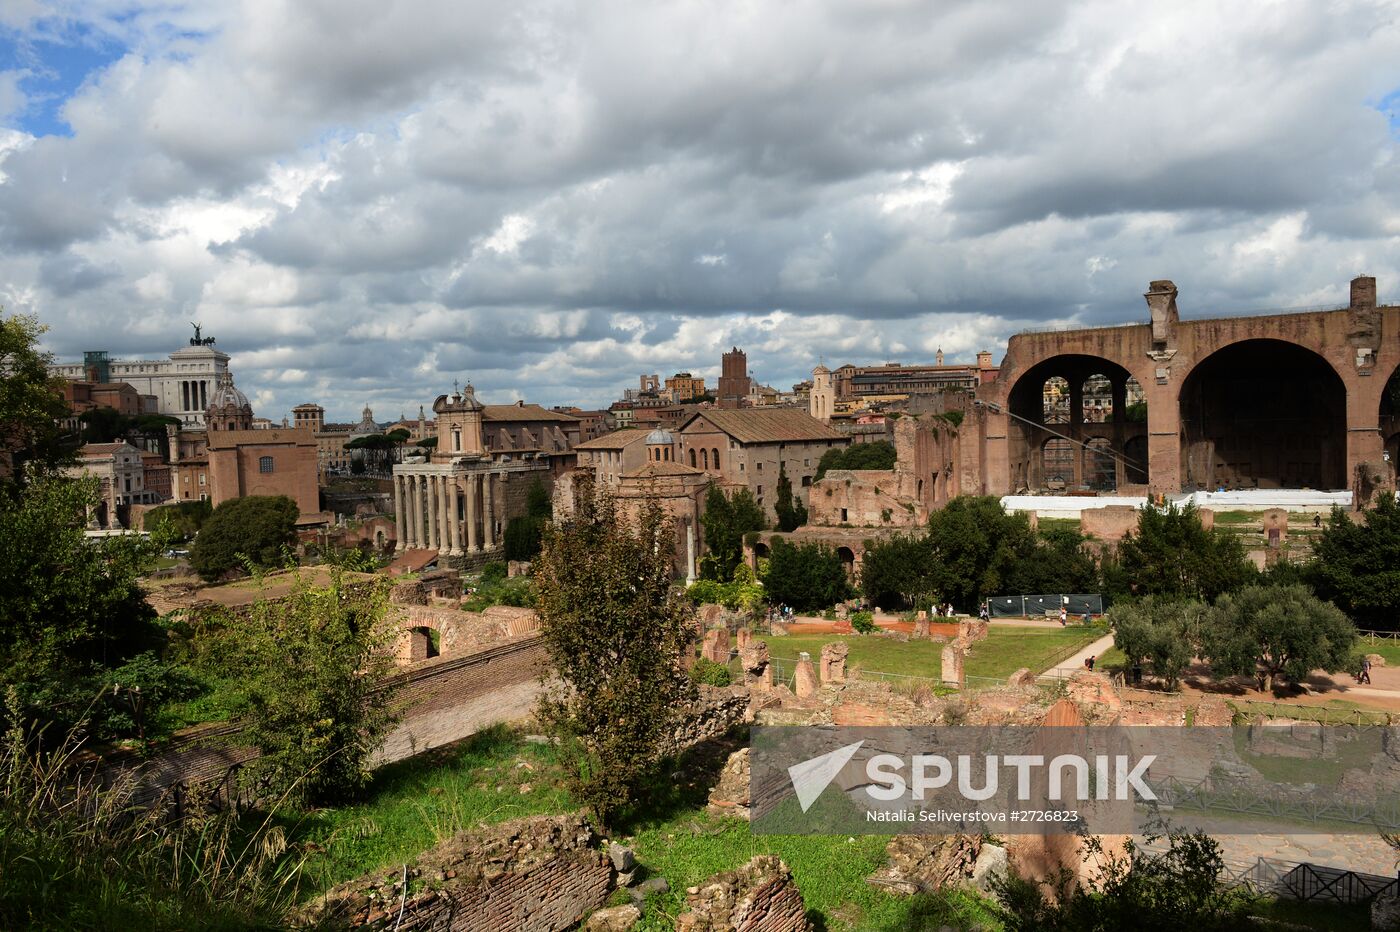 Cities of the world, Rome